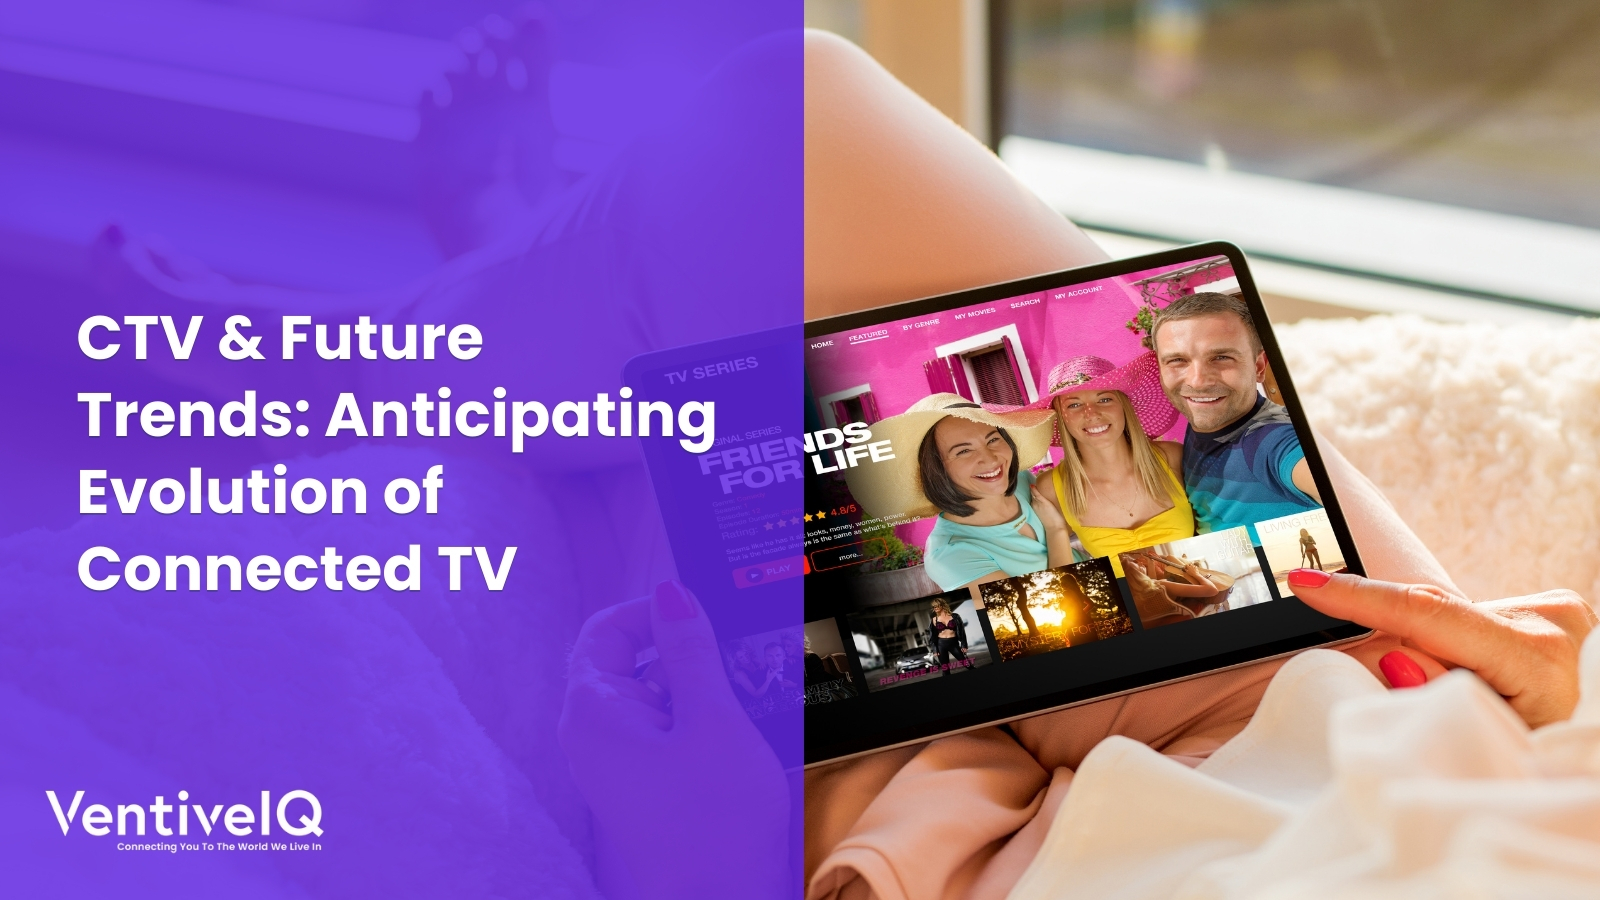 CTV & Future Trends: Anticipating Evolution of Connected TV